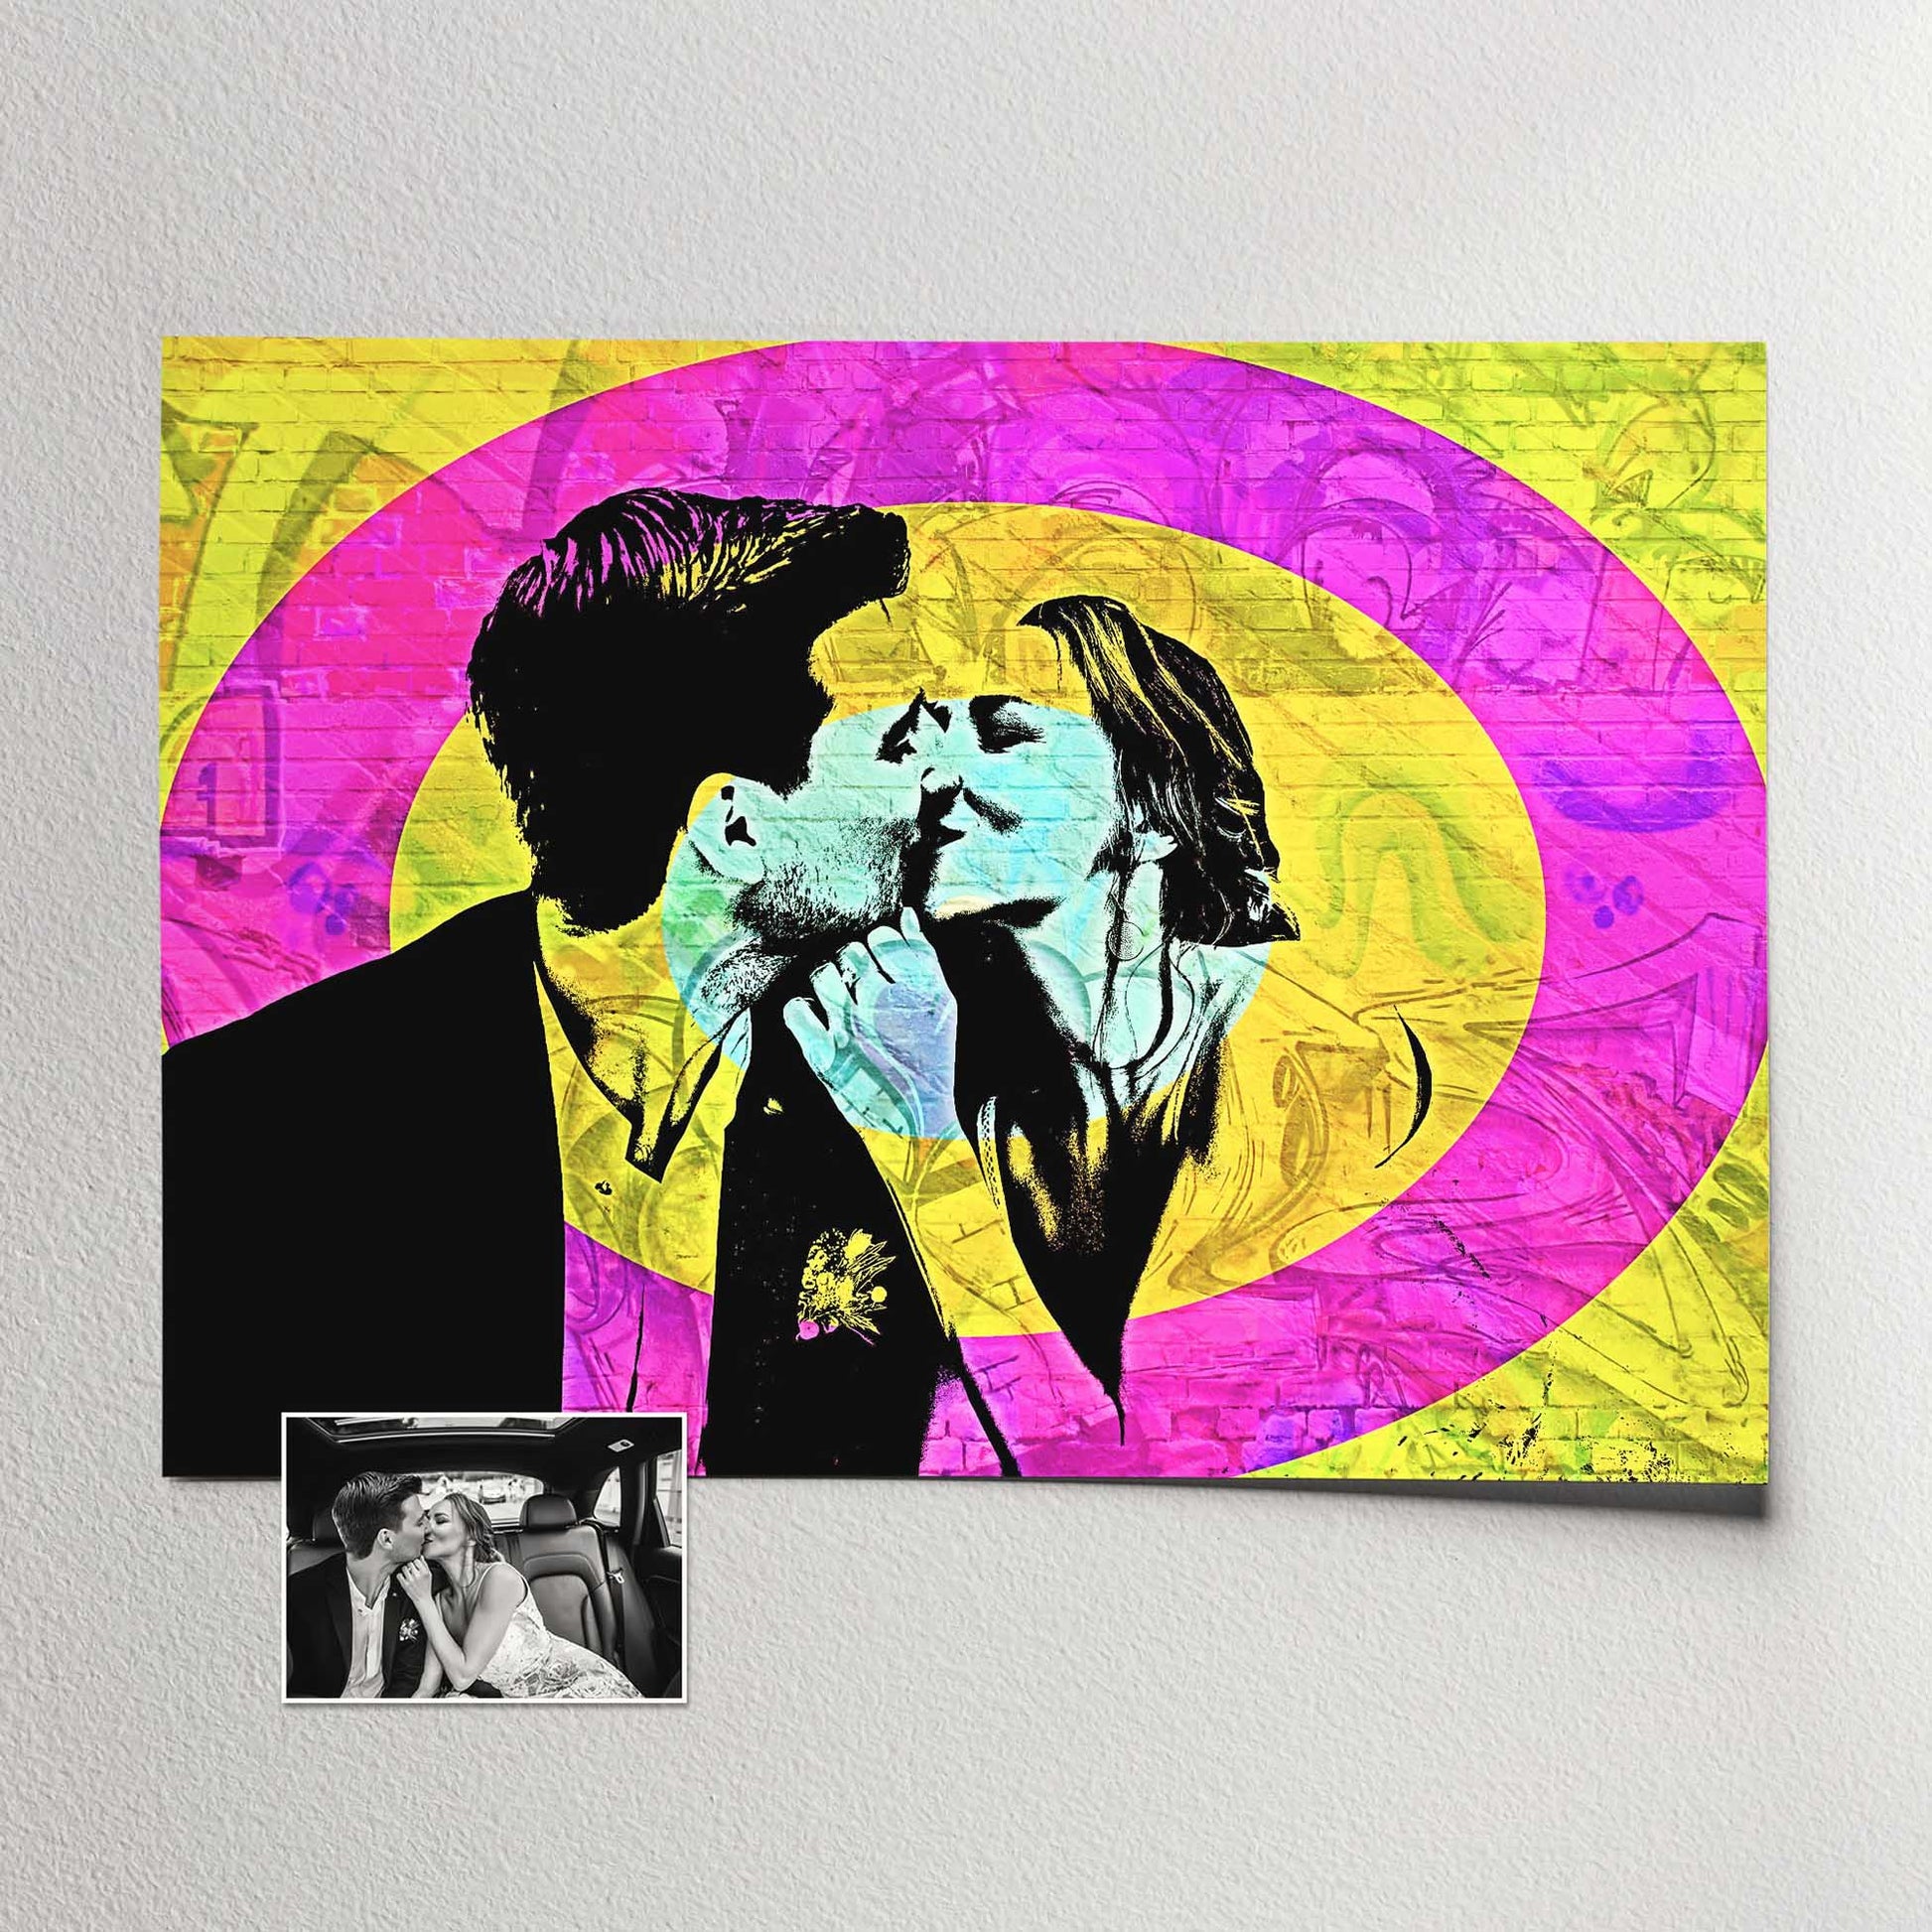 Add an urban edge to your space with a Personalised Graffiti Street Art Print. The graffiti street art filter and real brick effect create a unique and authentic look. The vibrant yellow, pink, and blue hues bring true boldness 